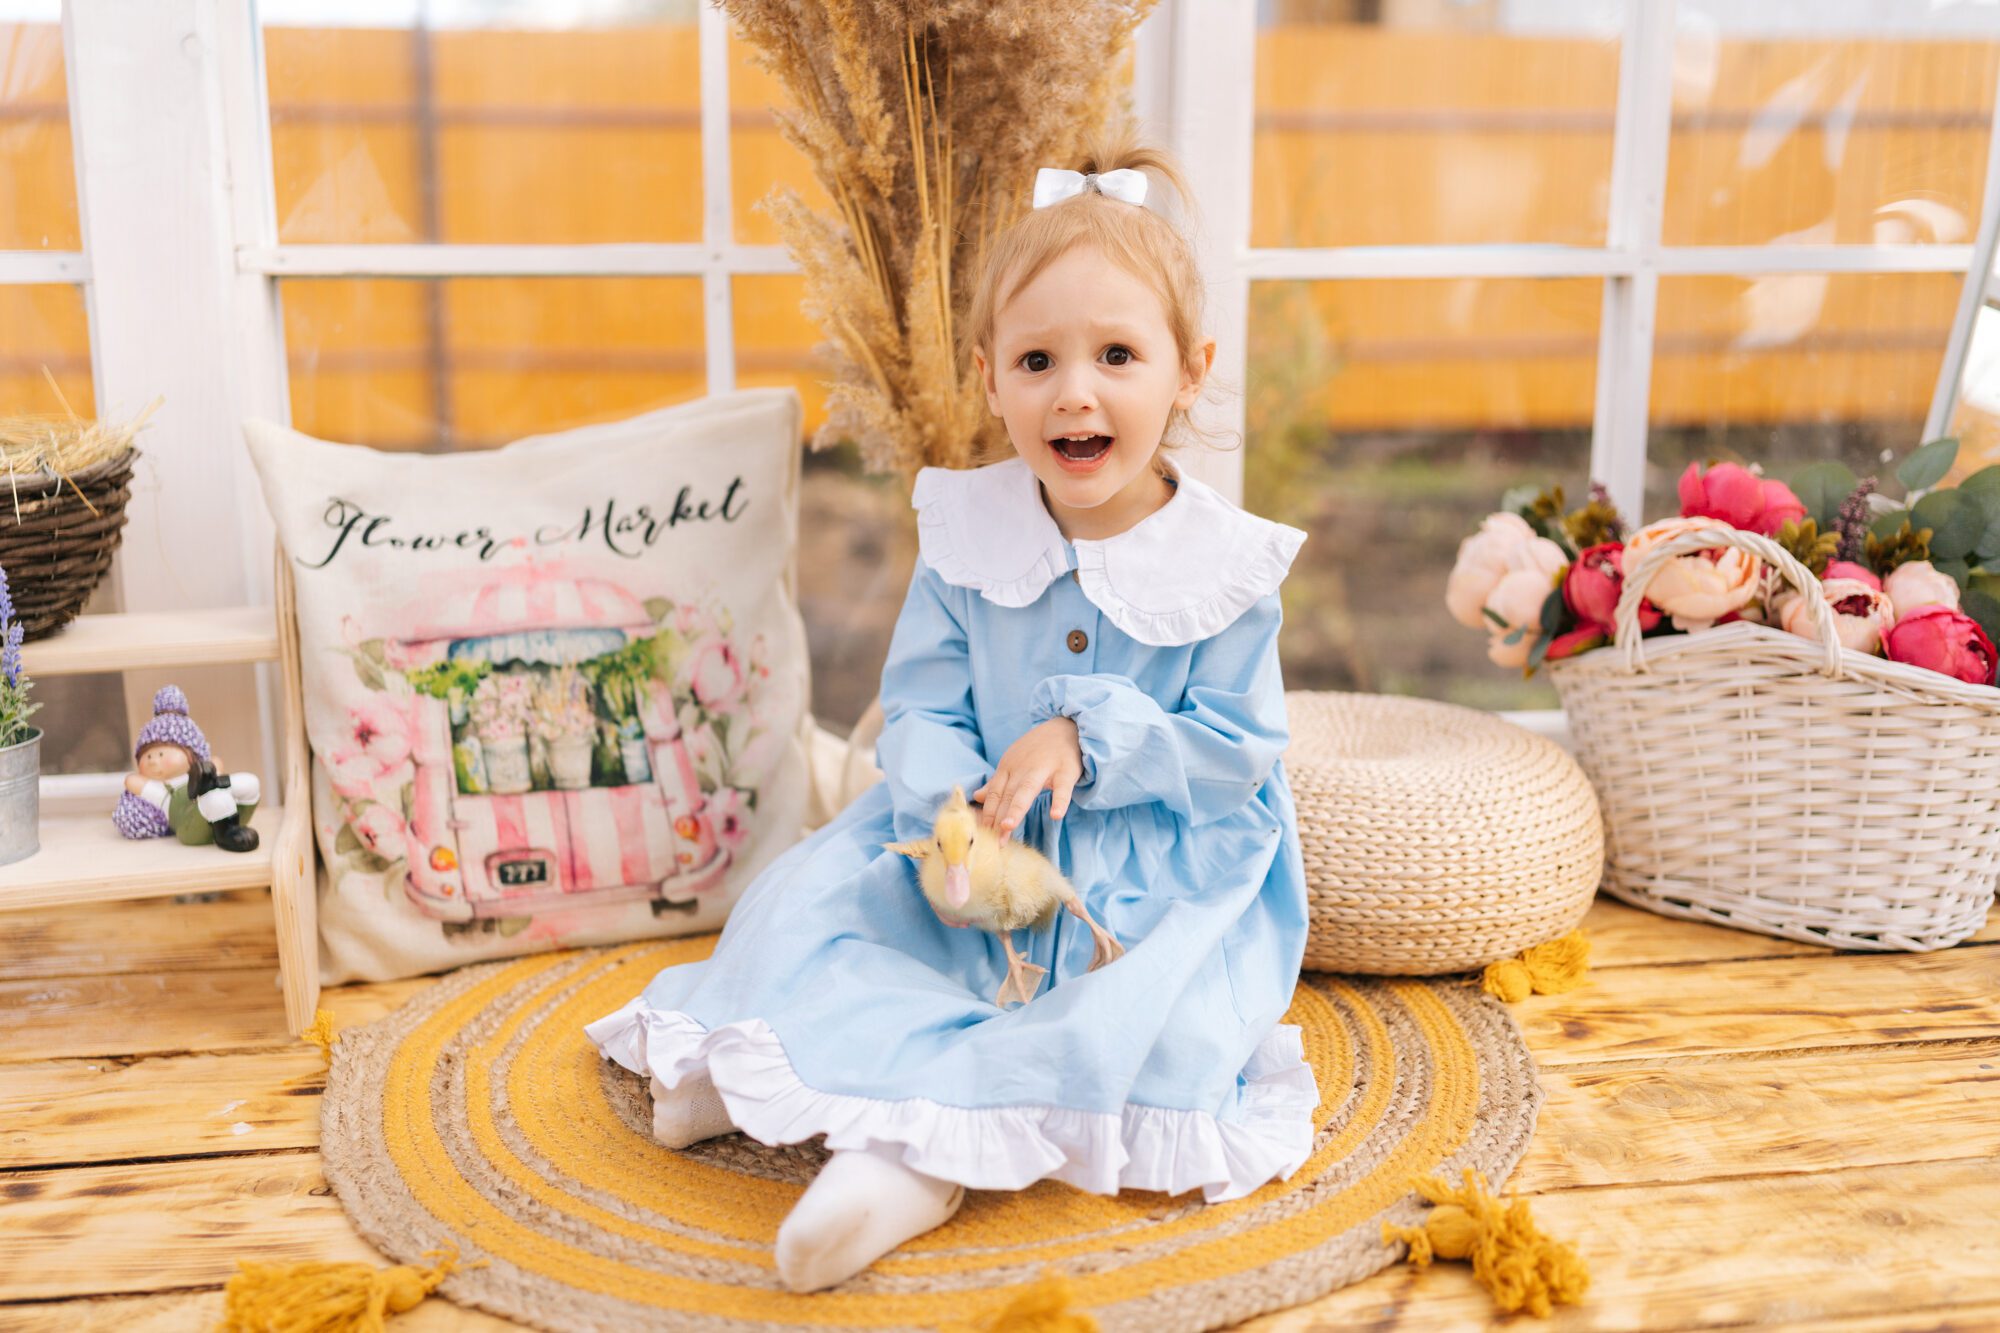 10 Creative Themes for Your Baby’s 1st Year Photoshoot